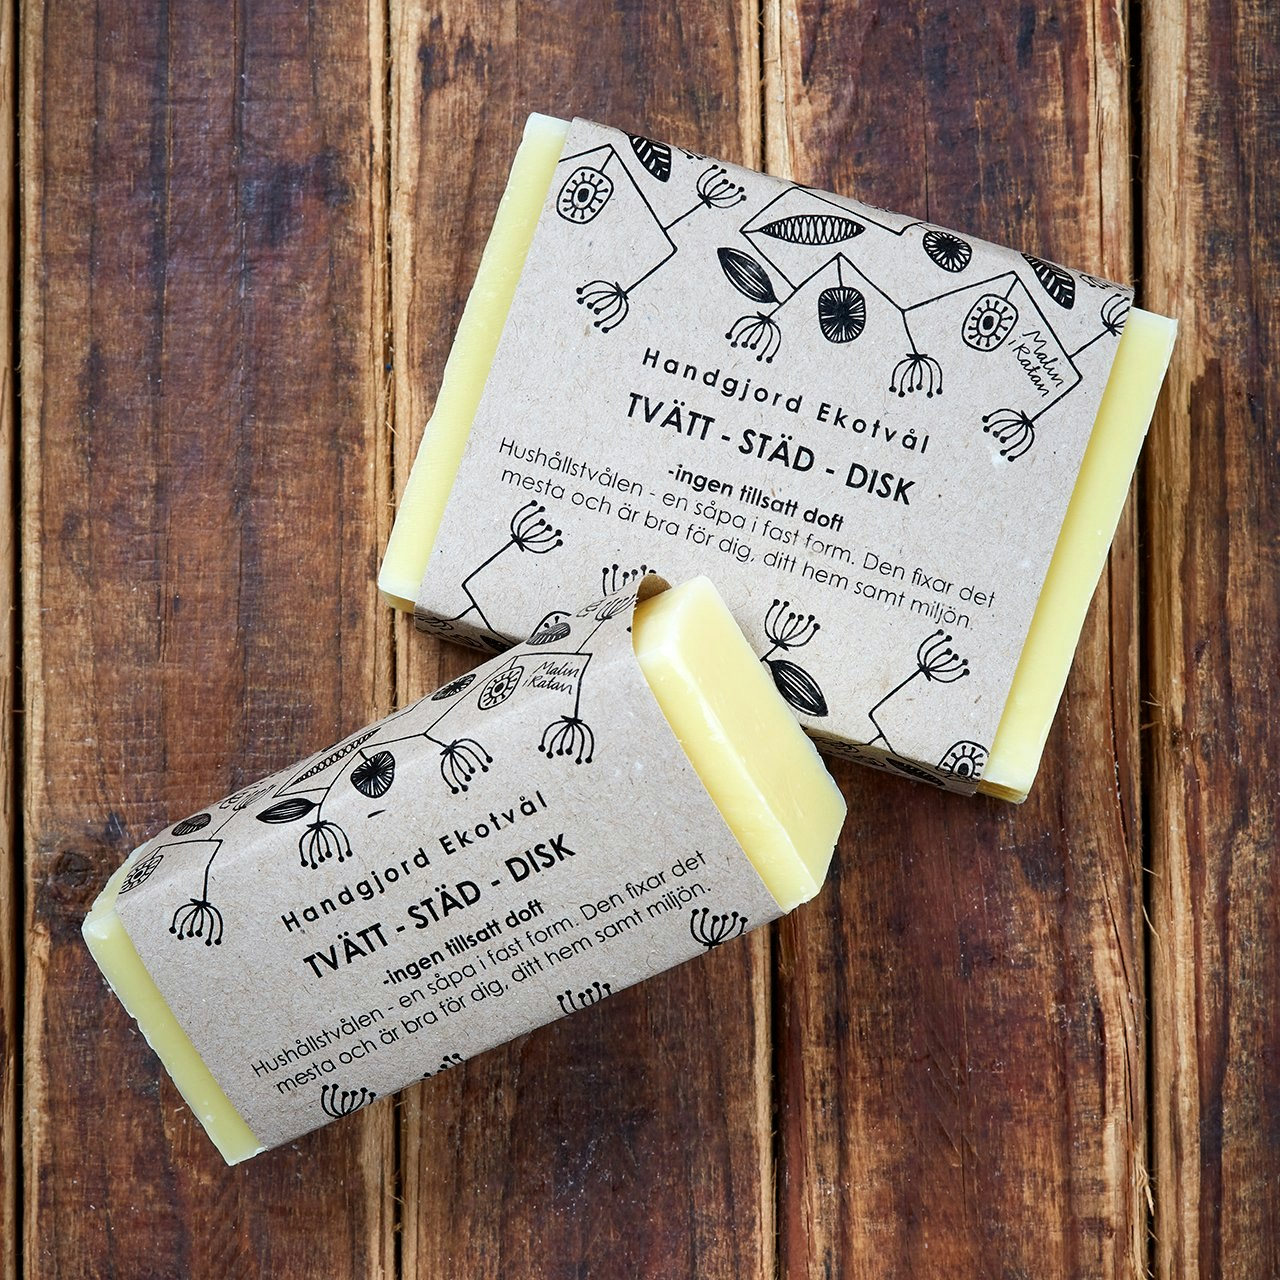 Handmade Eco Soap Laundry-Cleaning-Dishwashing - Unscented Solid ...